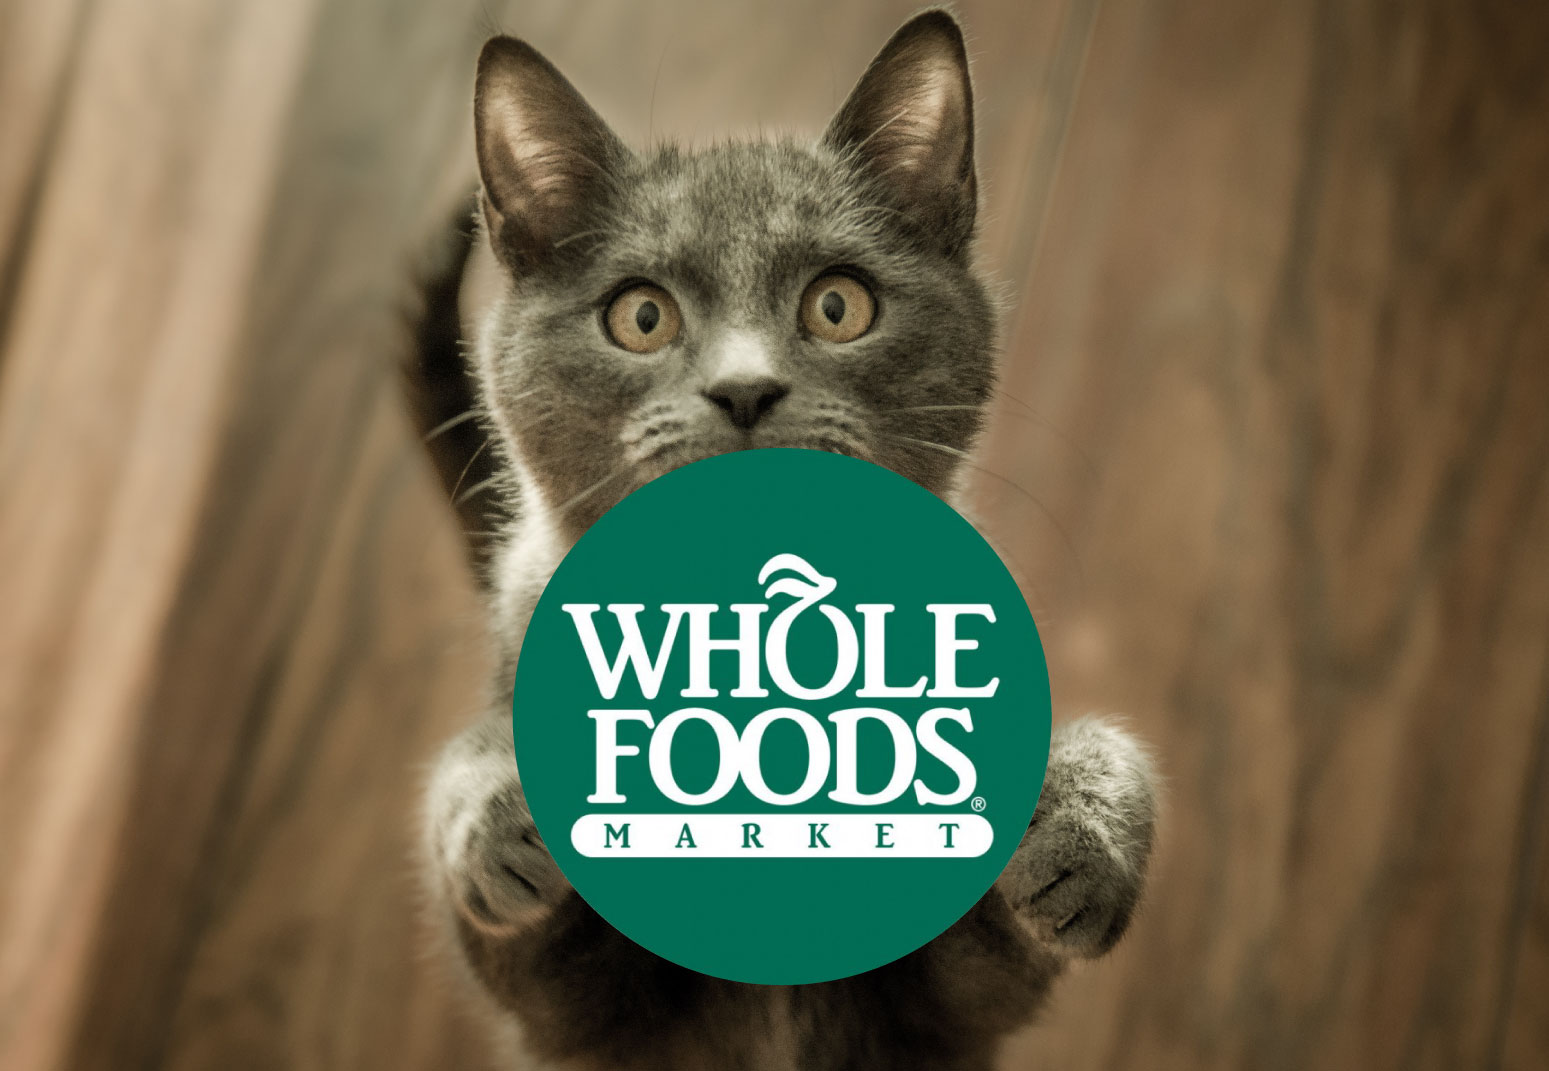 Kitten and Whole Foods logo